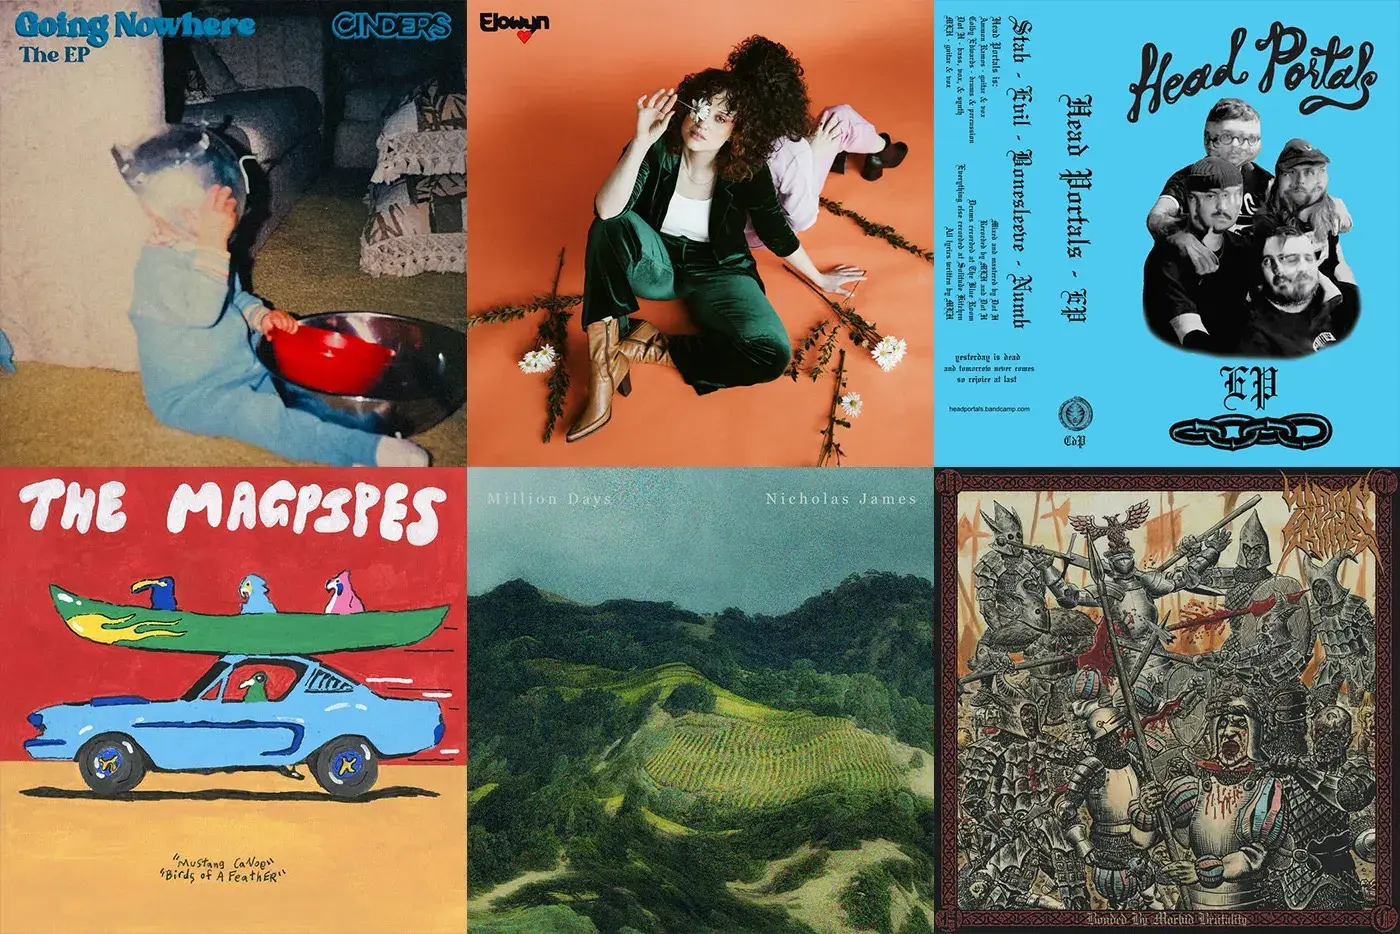 Another month, another six phenomenal singles from Salt Lake’s best local bands.